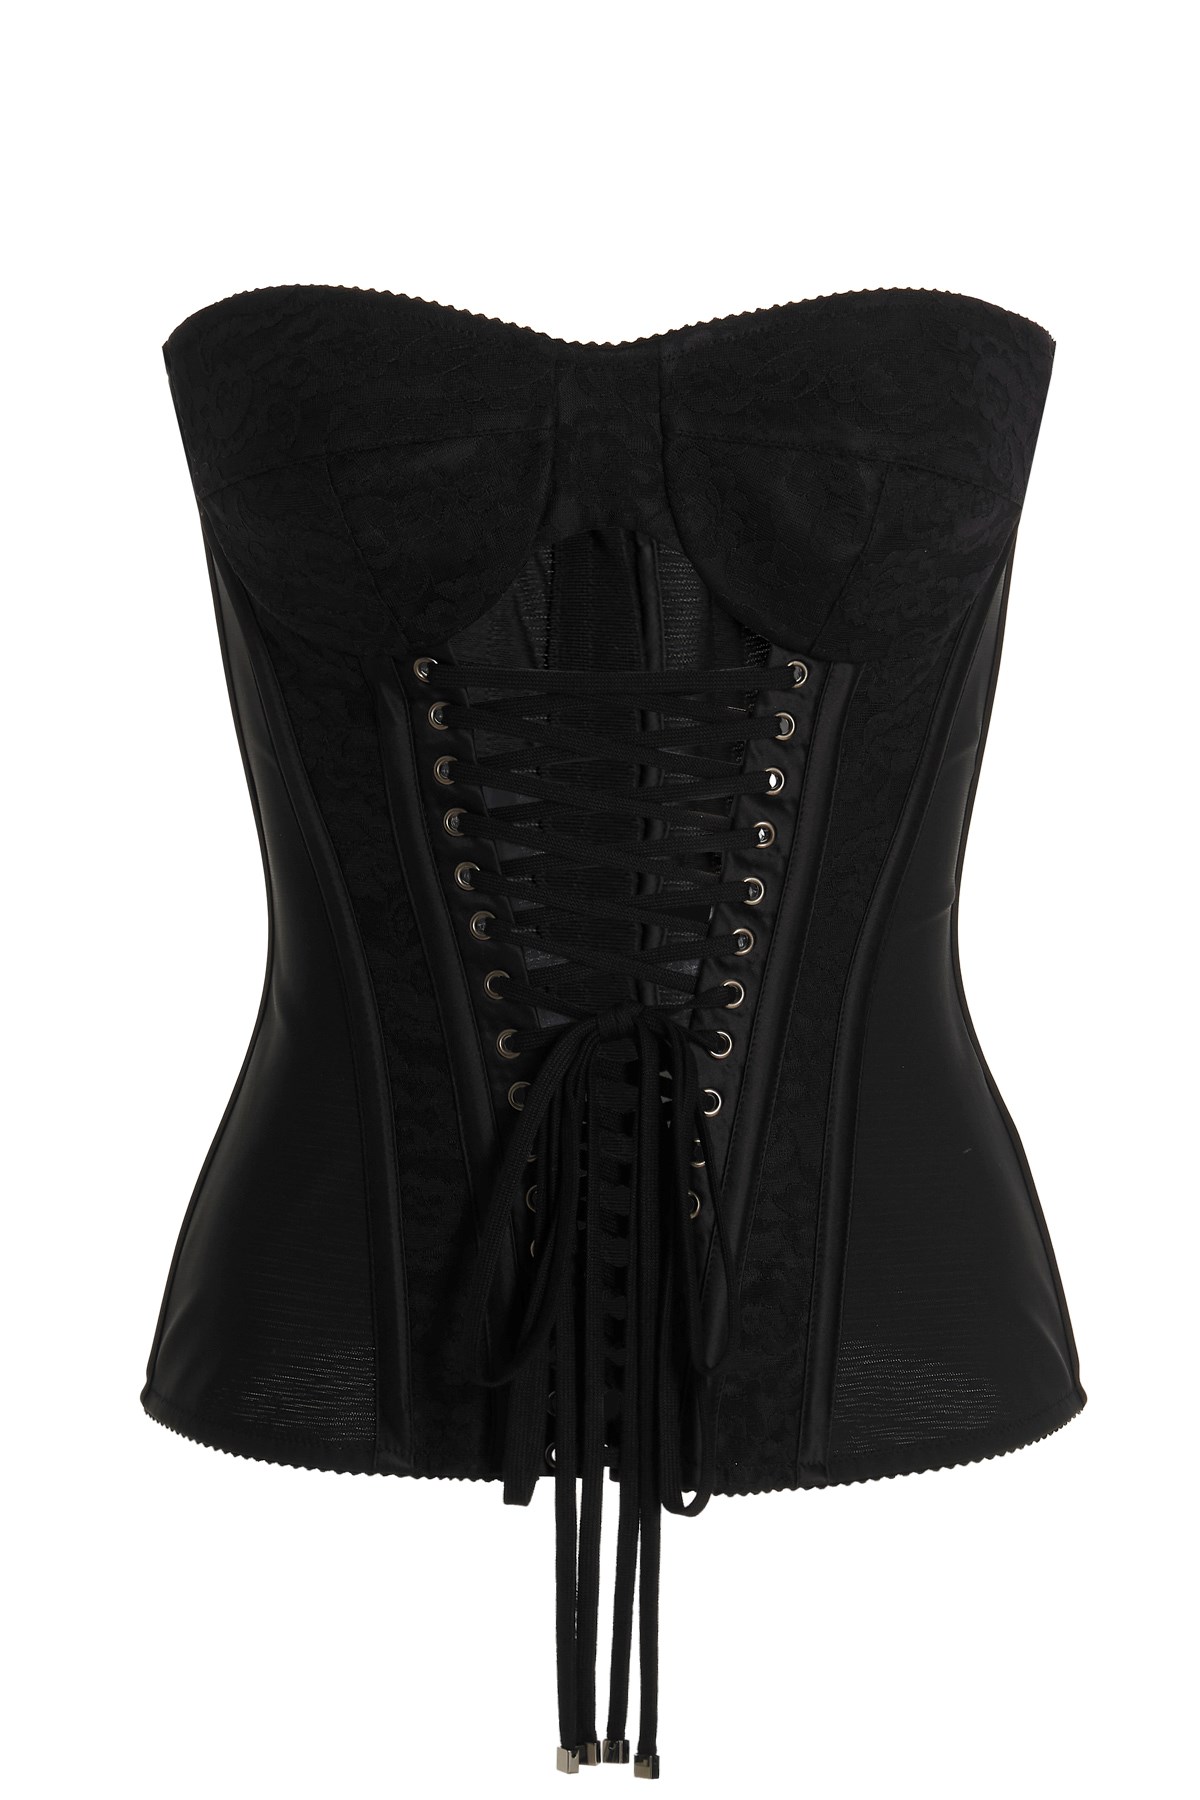 DOLCE & GABBANA Lace-Up Bustier Top